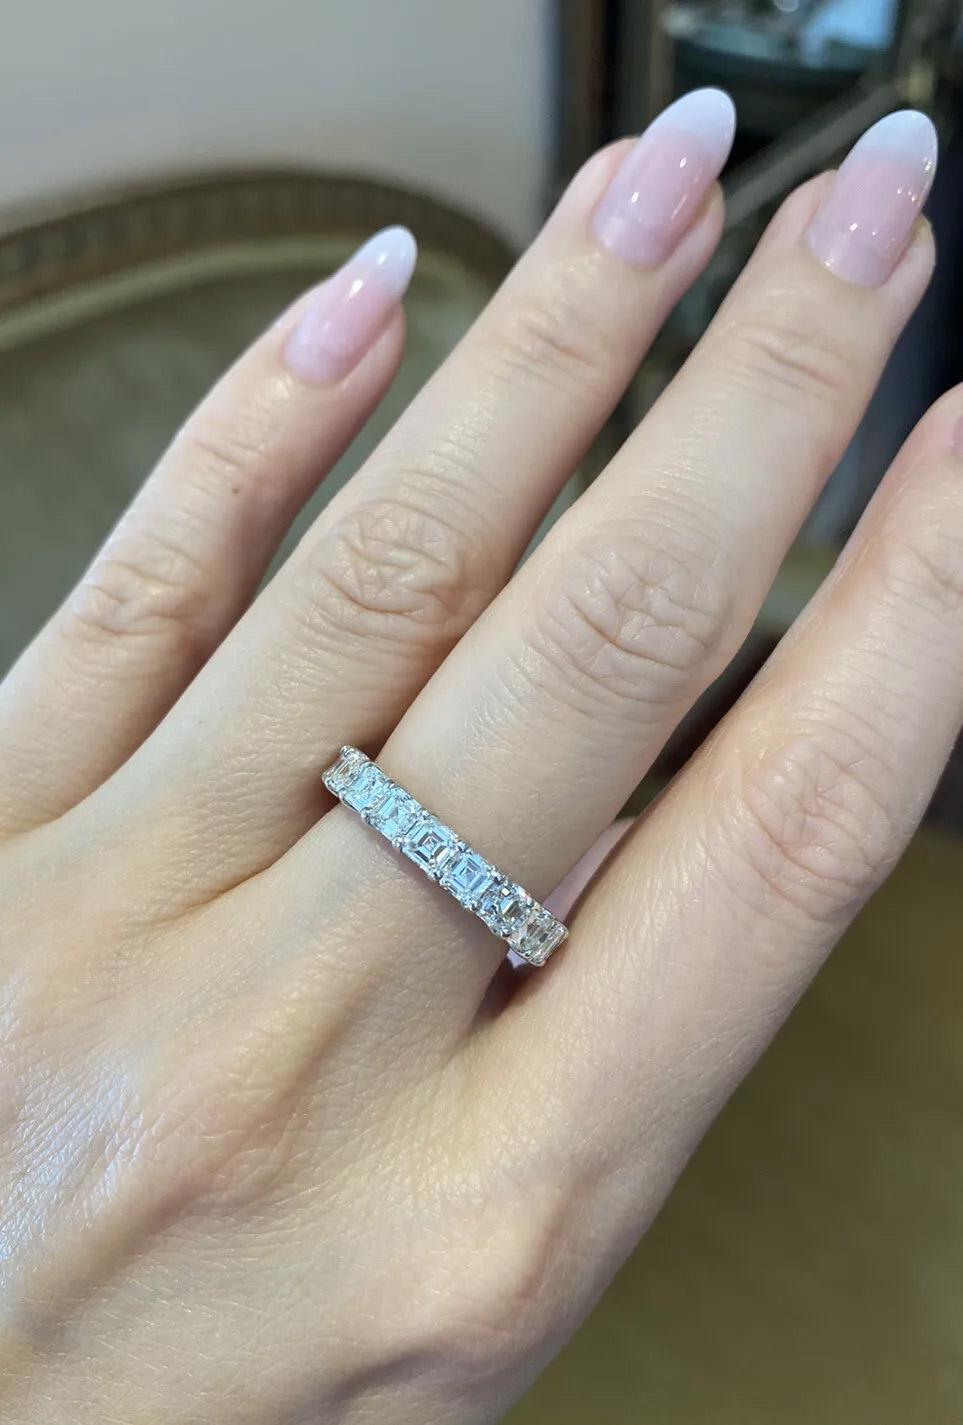 5.00 Carats Asscher Cut Diamond Eternity Band Size 7 in 18K White Gold In Excellent Condition For Sale In La Jolla, CA